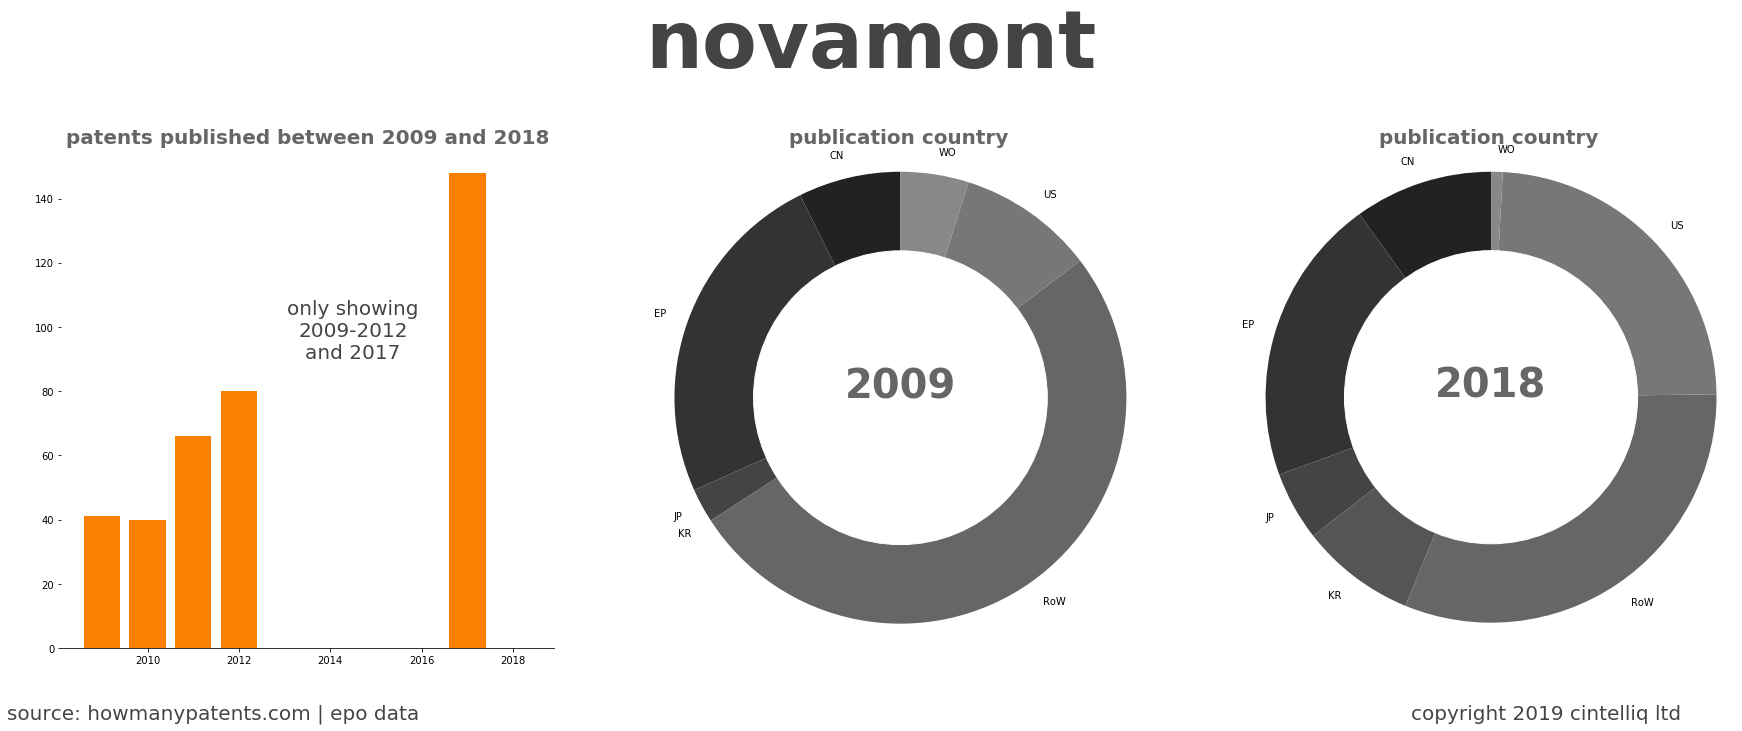 summary of patents for Novamont